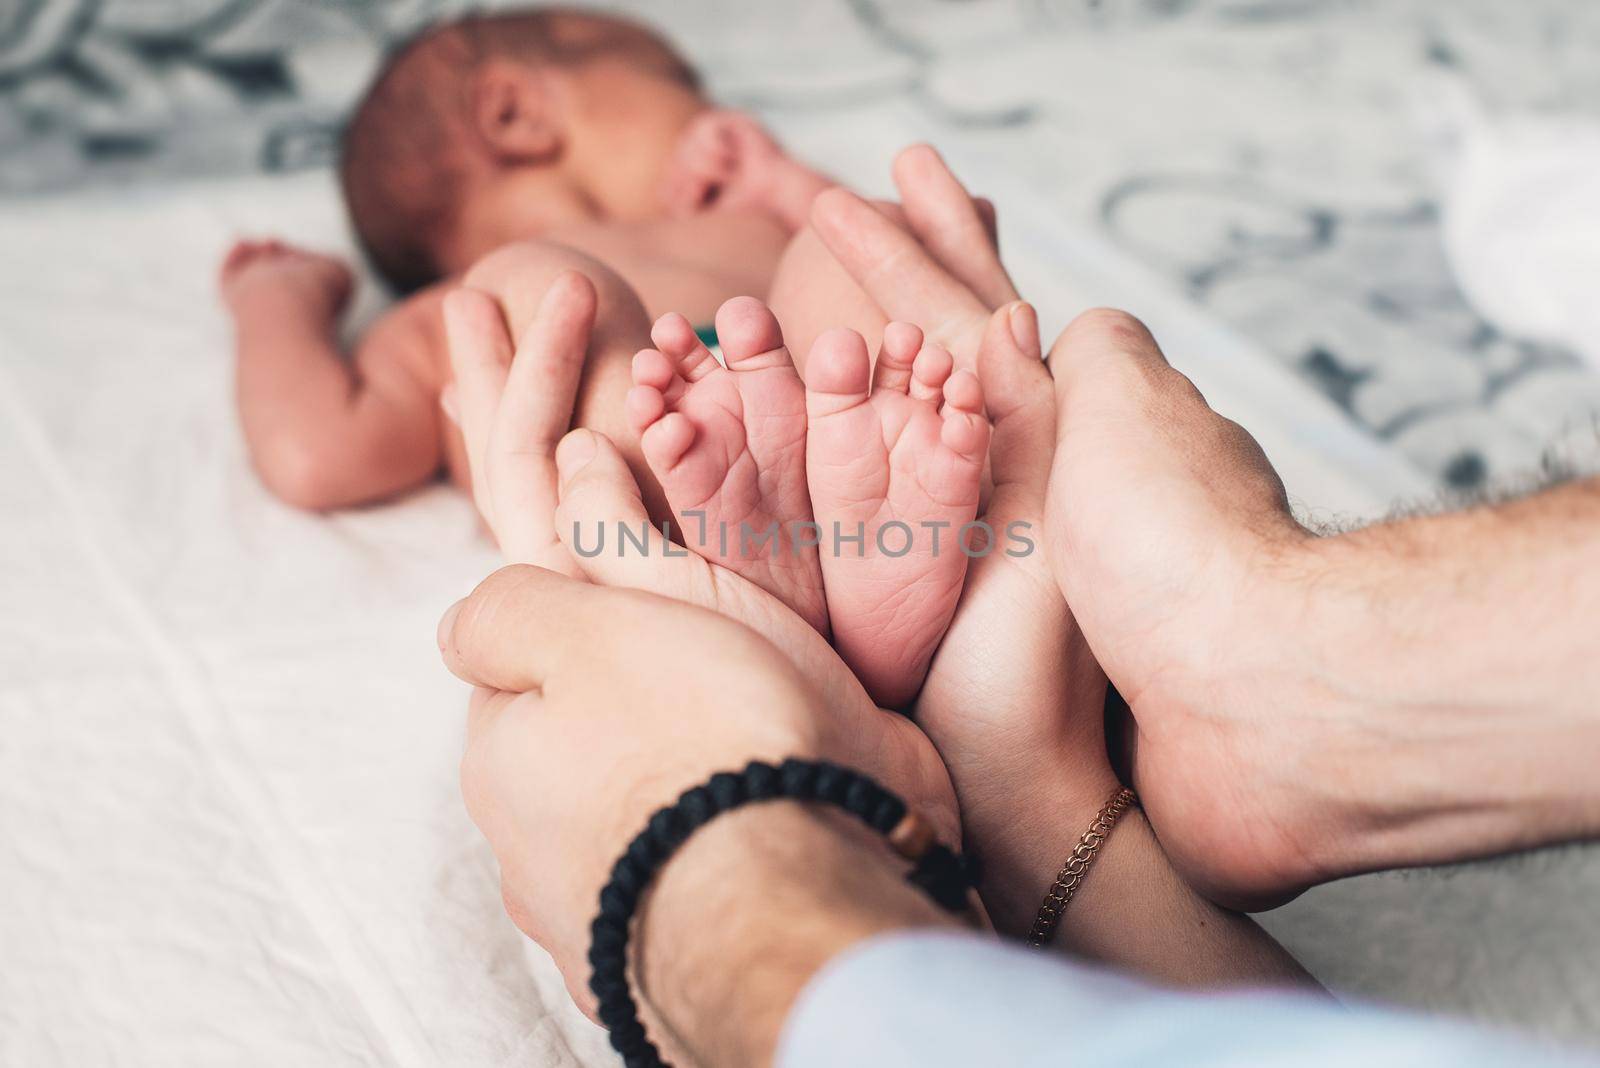 Baby feet in hands of parents. Happy Family concept by Ashtray25